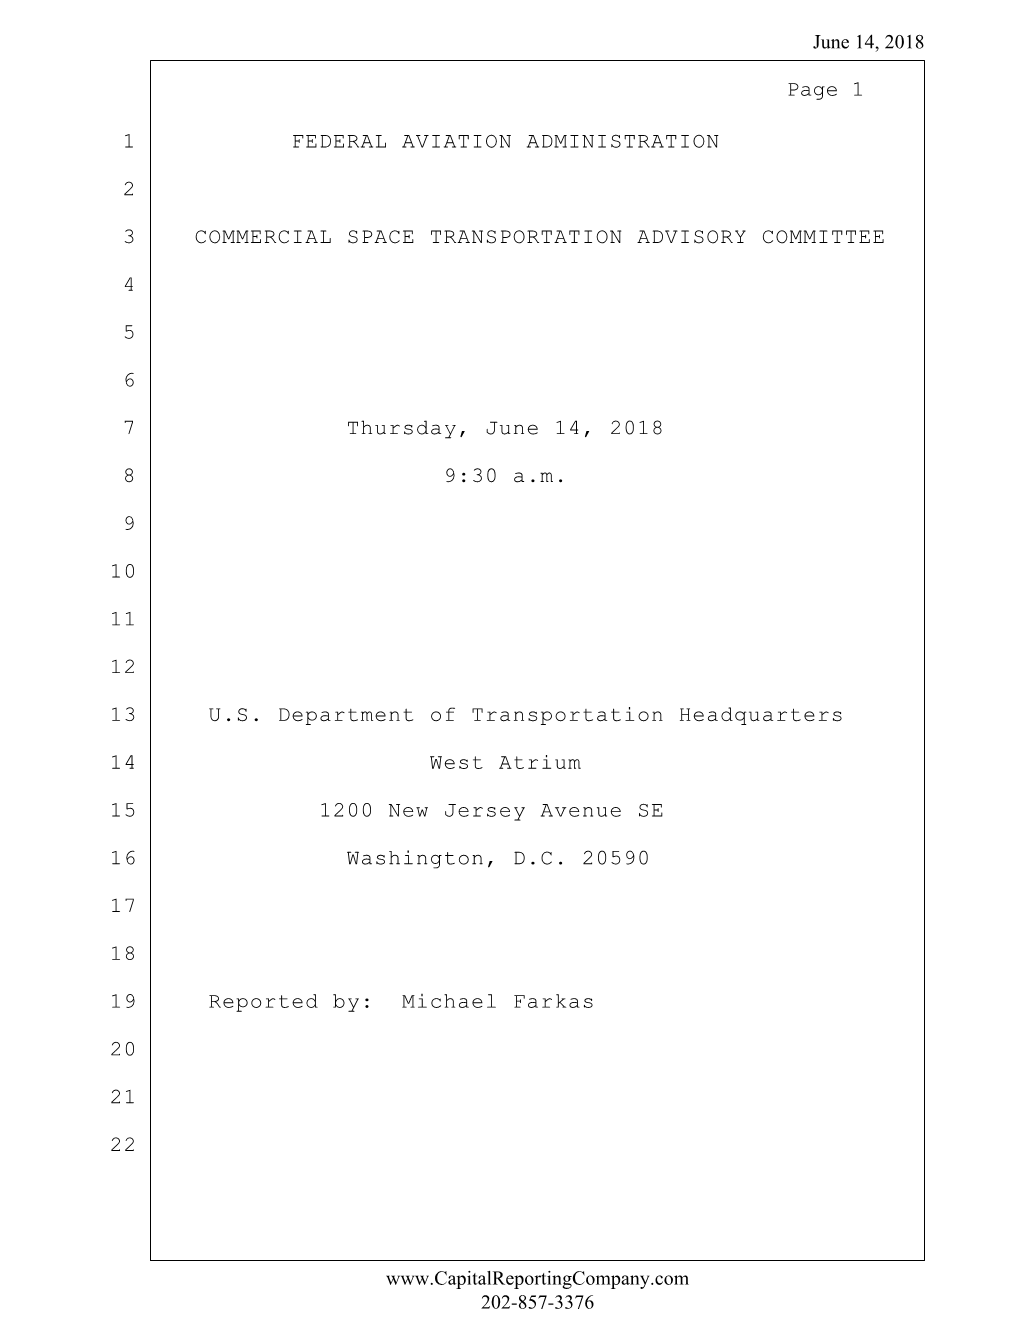 1 FEDERAL AVIATION ADMINISTRATION 2 3 COMMERCIAL SPACE TRANSPORTATION ADVISORY COMMITTEE 4 5 6 7 Thursday, June 14, 2018 8 9:30